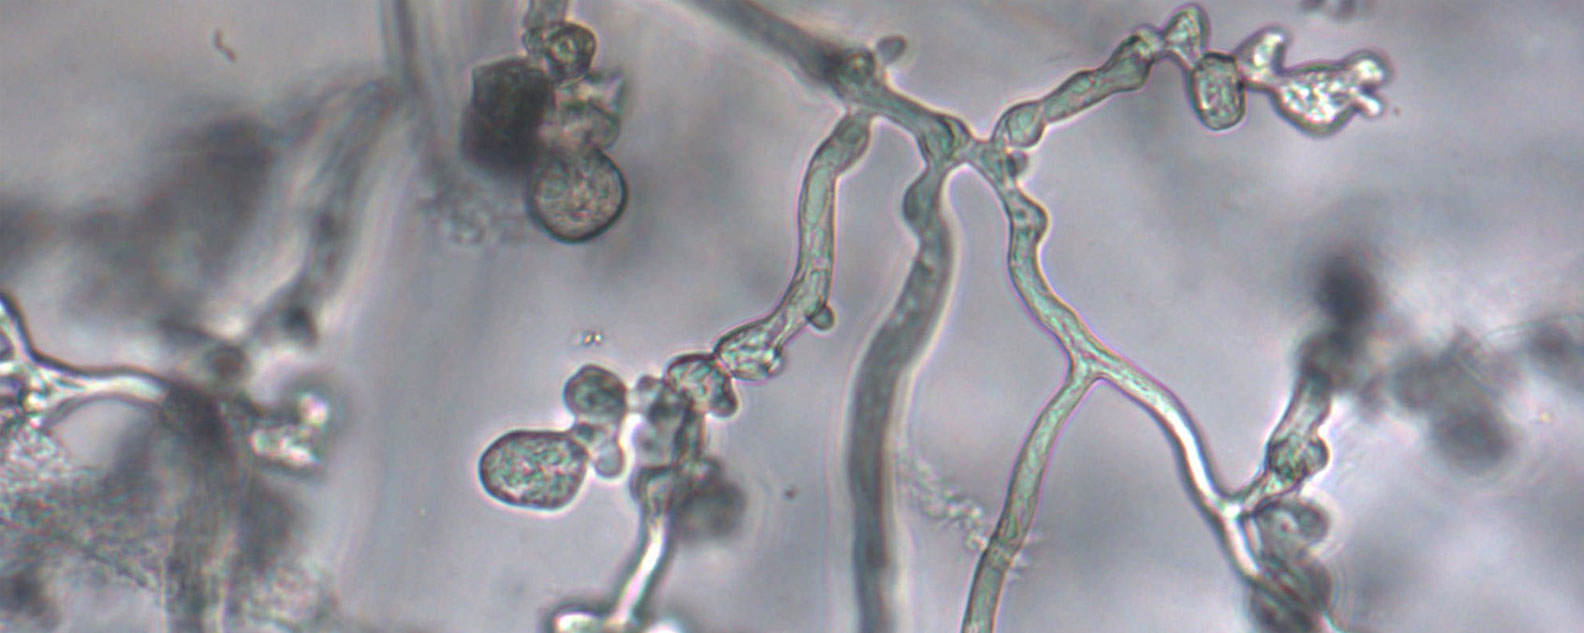 Phytophthora cinnamomi fungal hyphae under the microscope